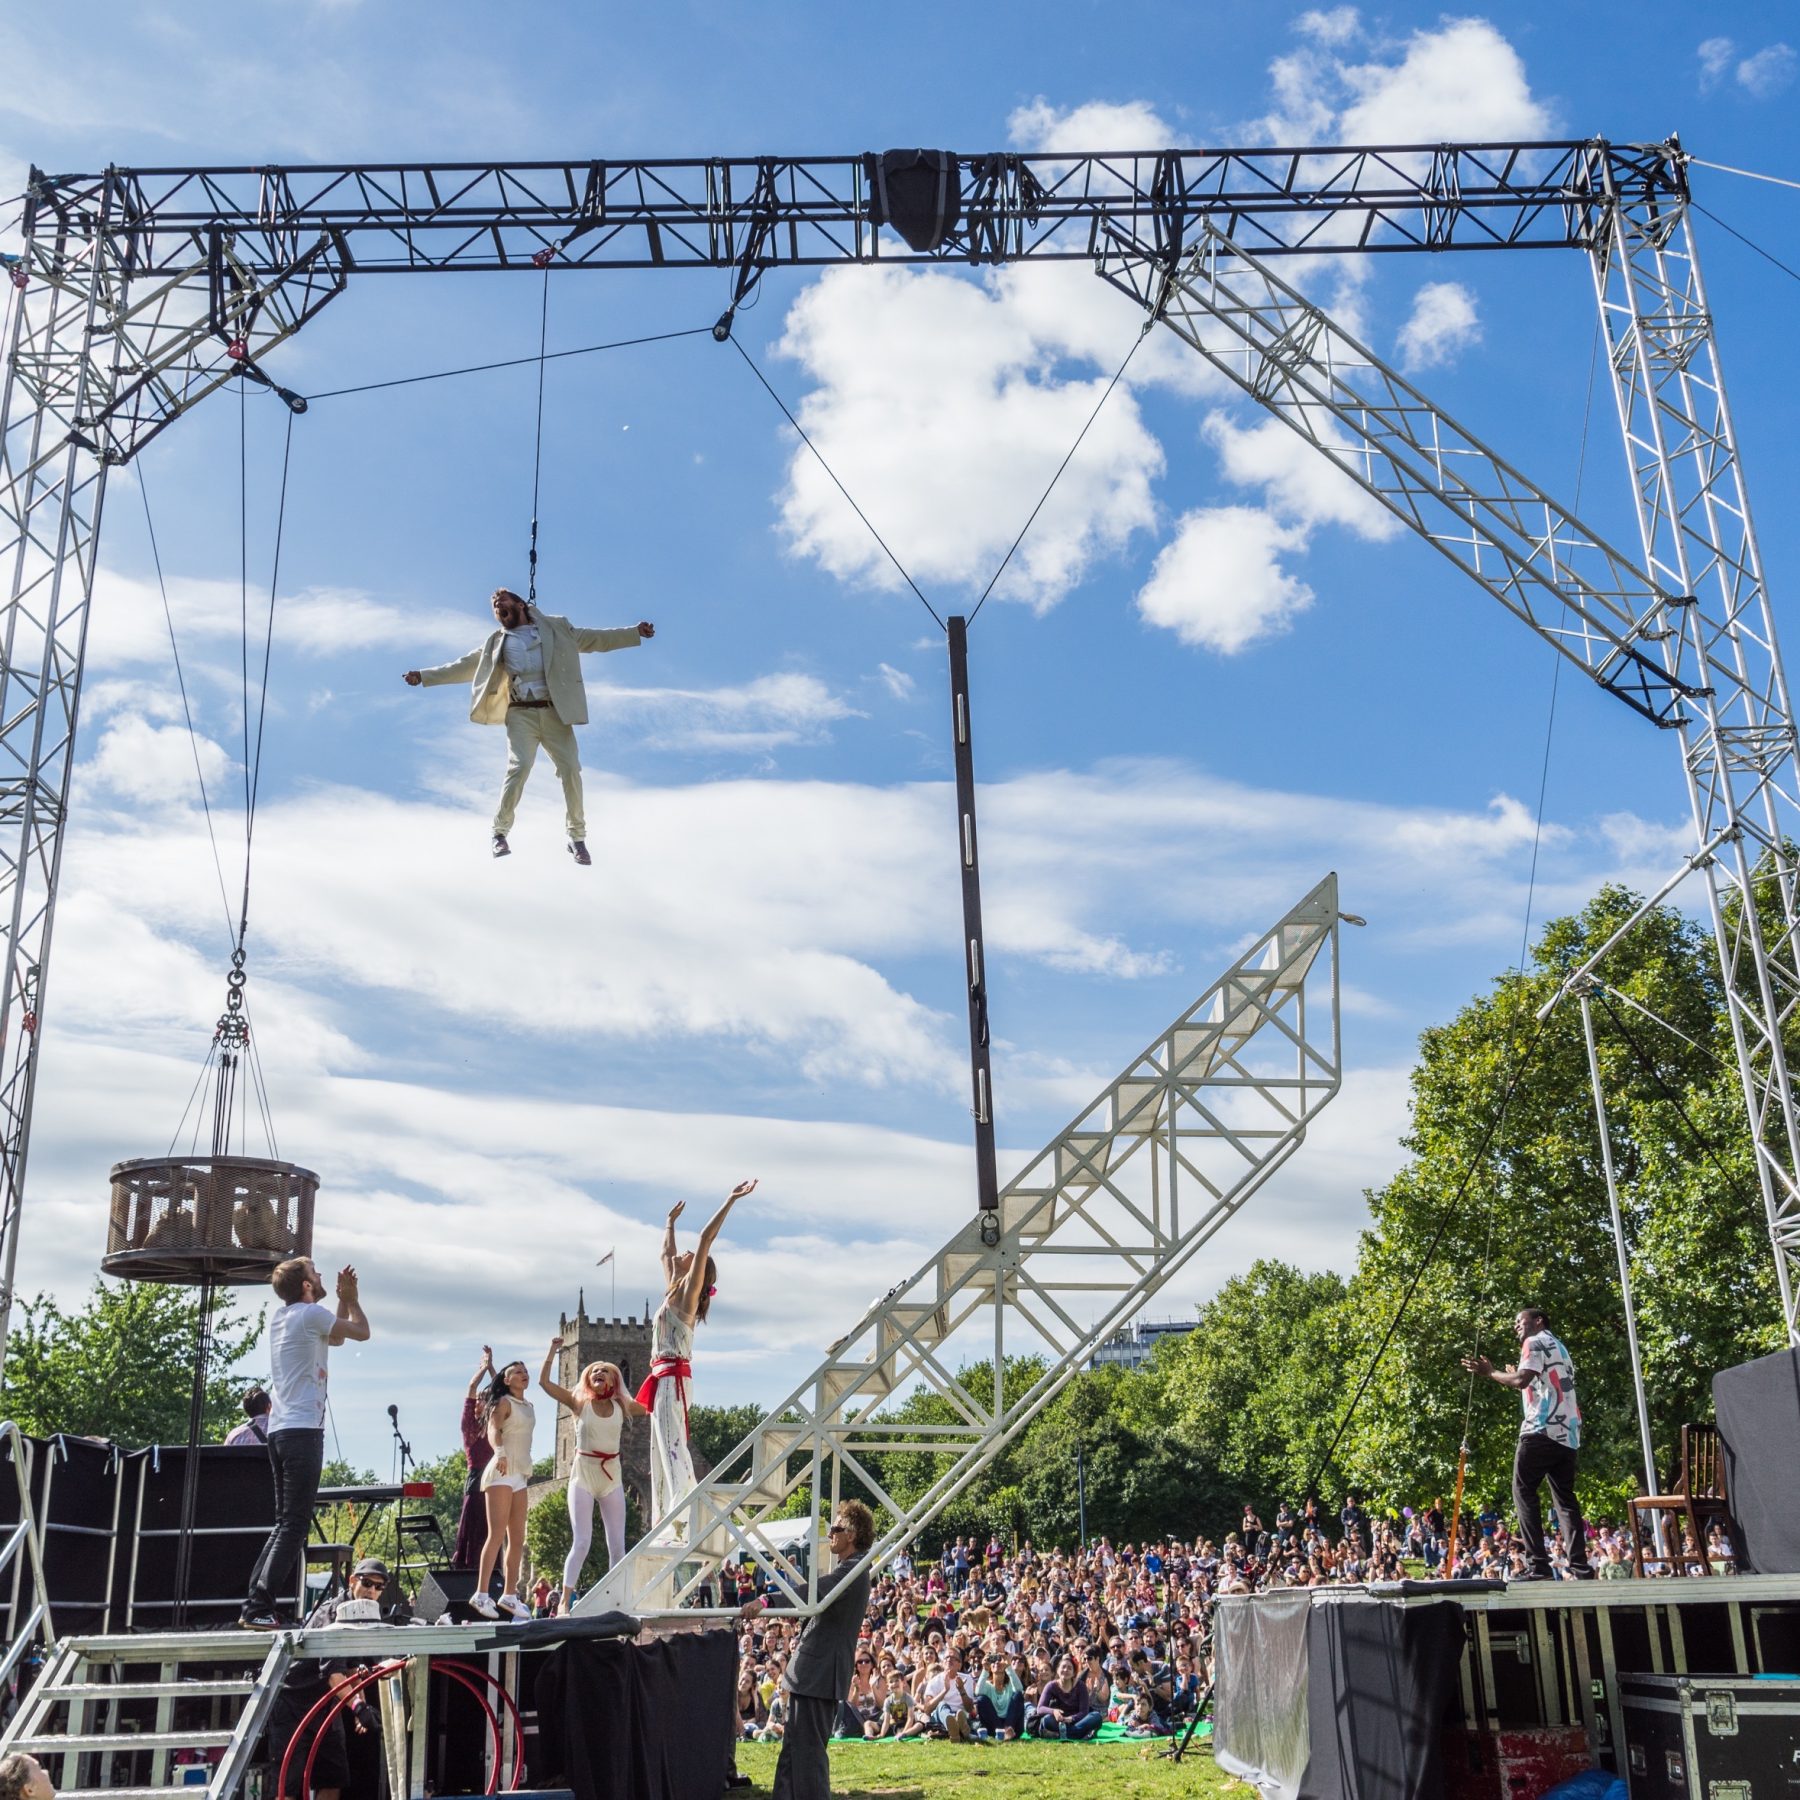 Weighting show in Castle Park. Jamie Beddard flying from large rig. Cast celebrate below, stretching arms up towards him. Large crowd watching show.